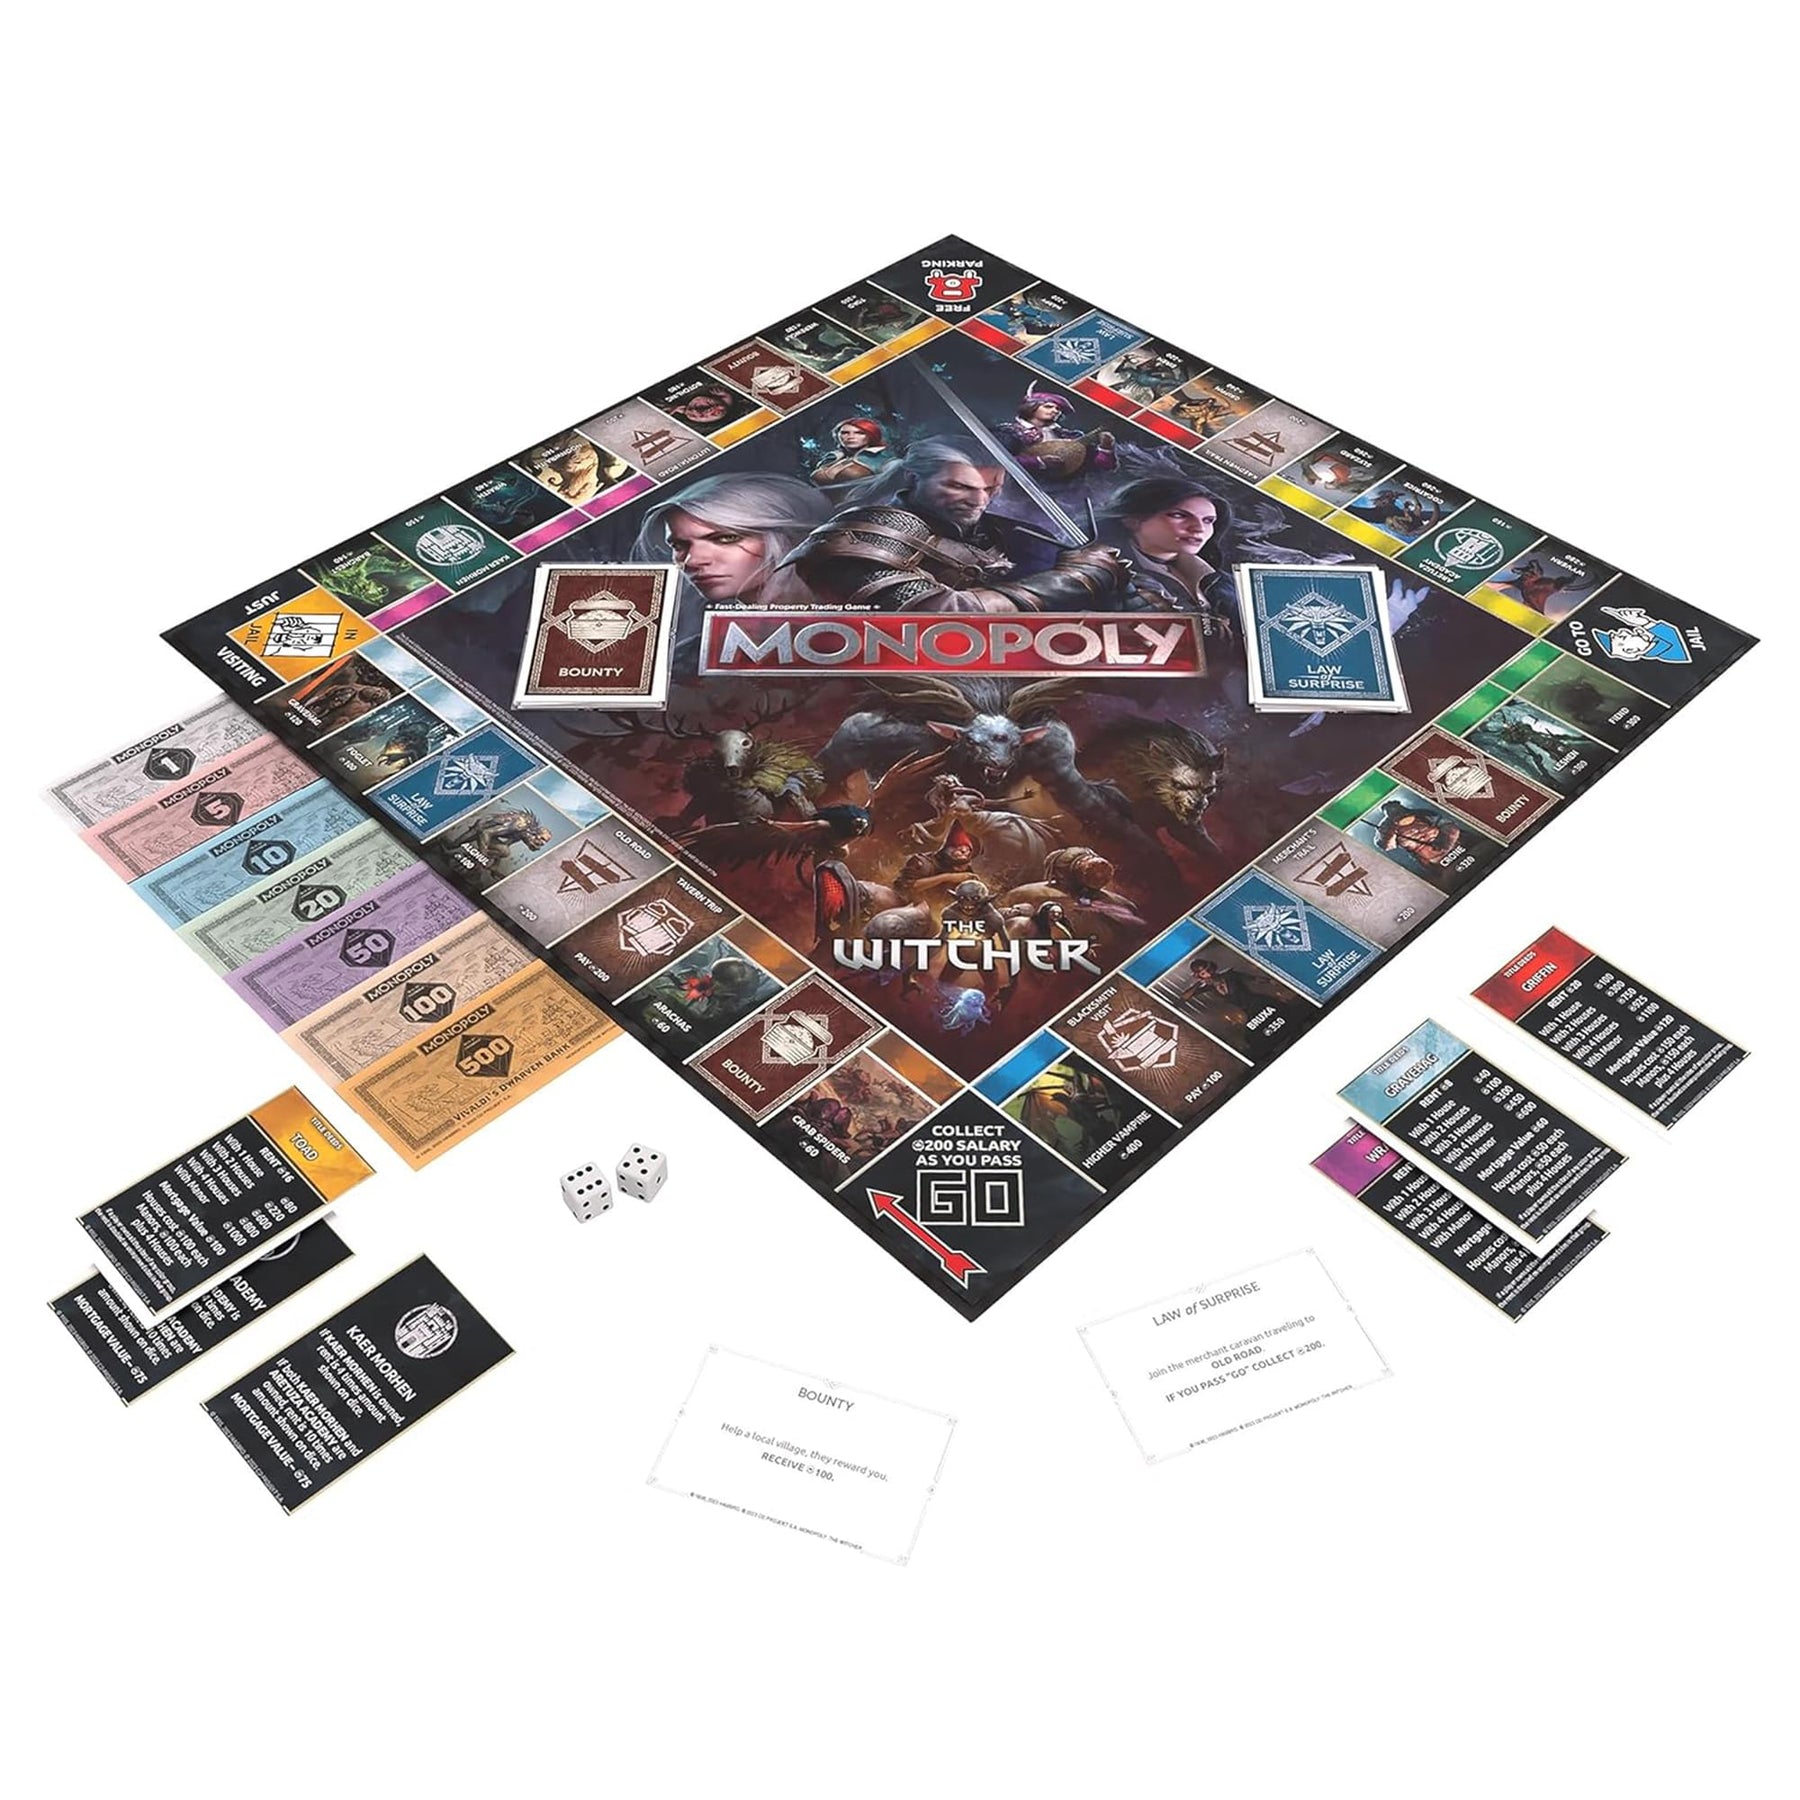 The Witcher Monopoly Board Game